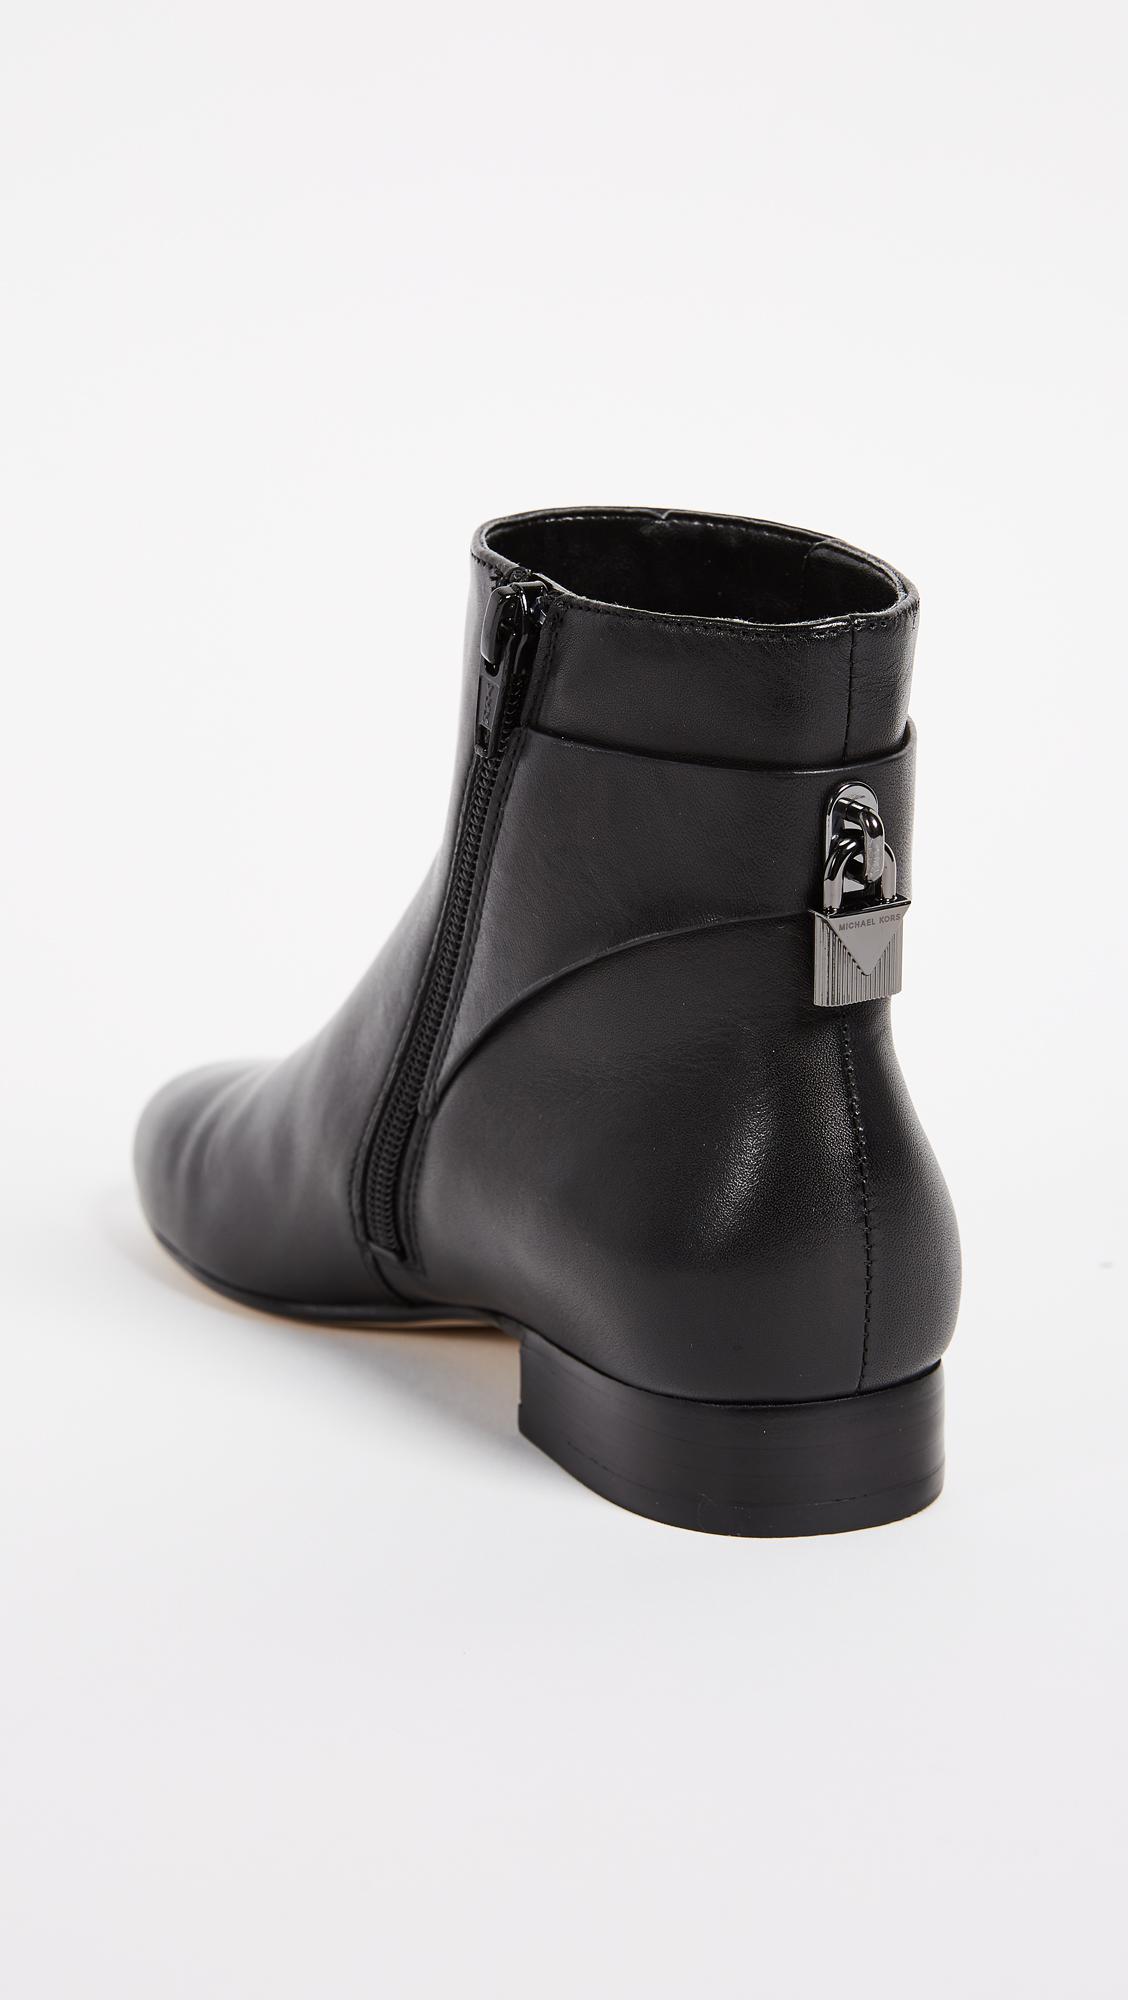 MICHAEL Michael Kors Leather Mira Flat Ankle Booties in Black | Lyst